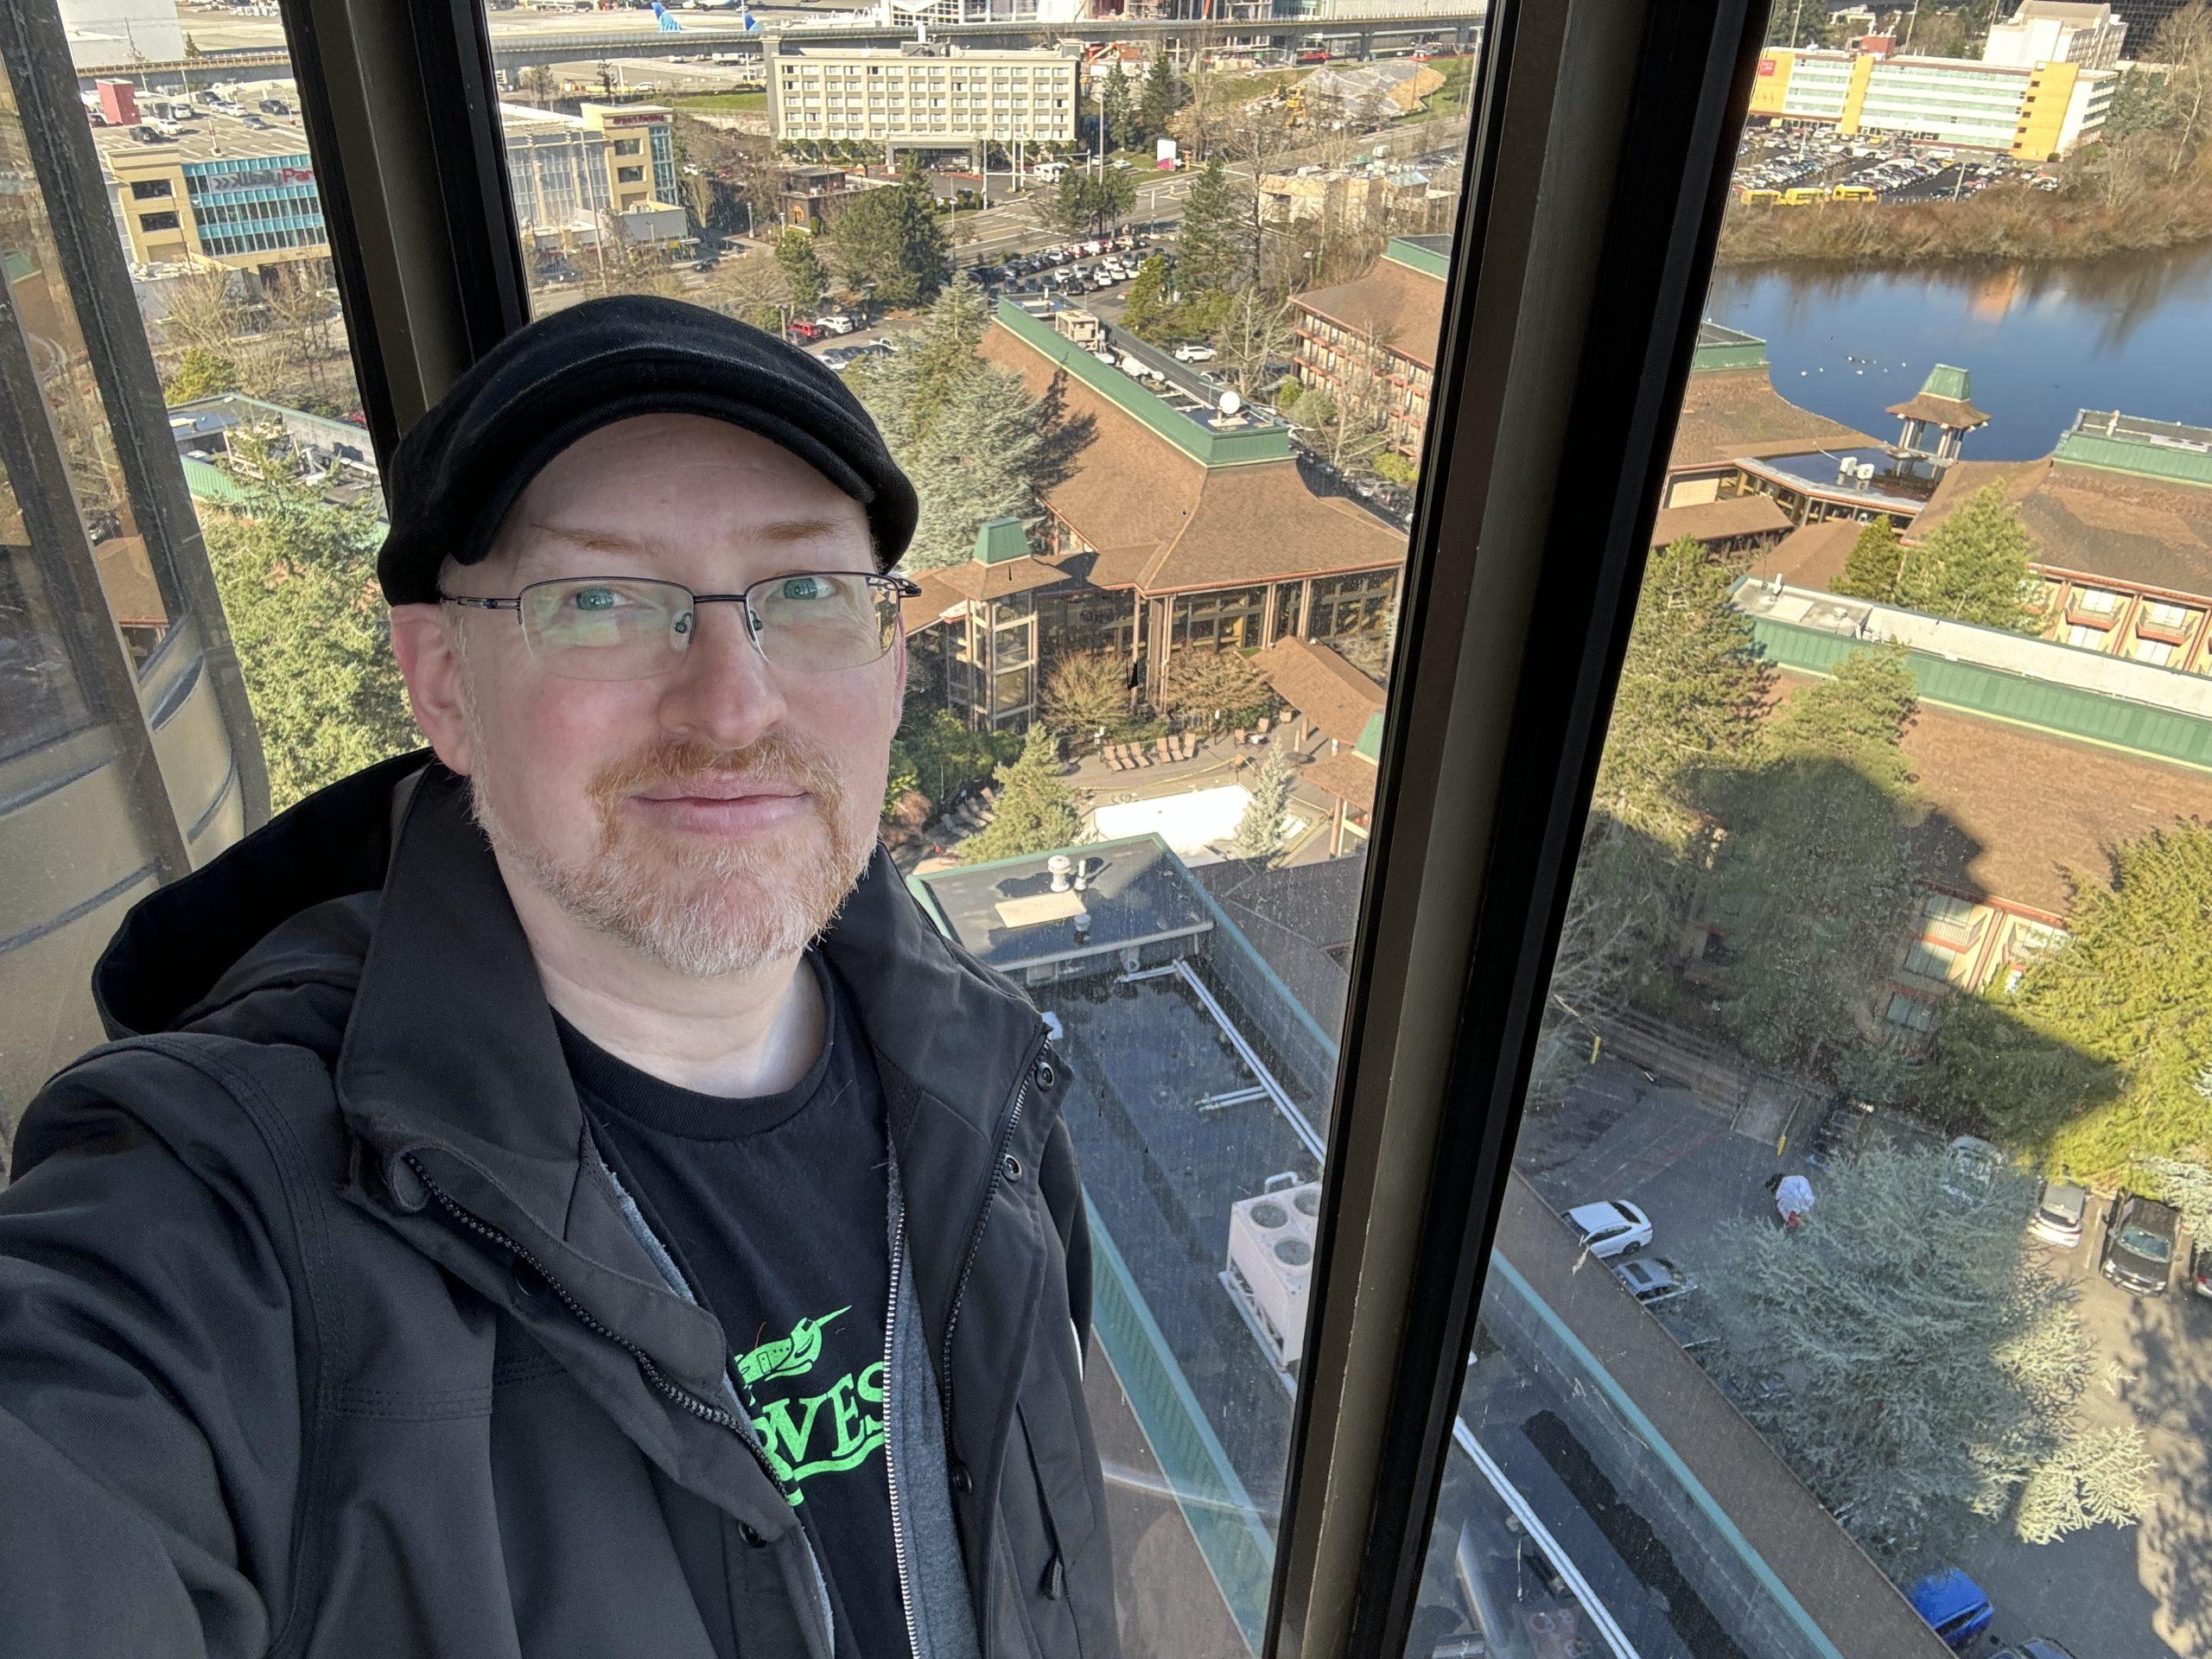 Me in a glass-walled elevator overlooking the outside of the DoubleTree Seattle Airport hotel, with several of the hotel wings and the lake visible in the distance.